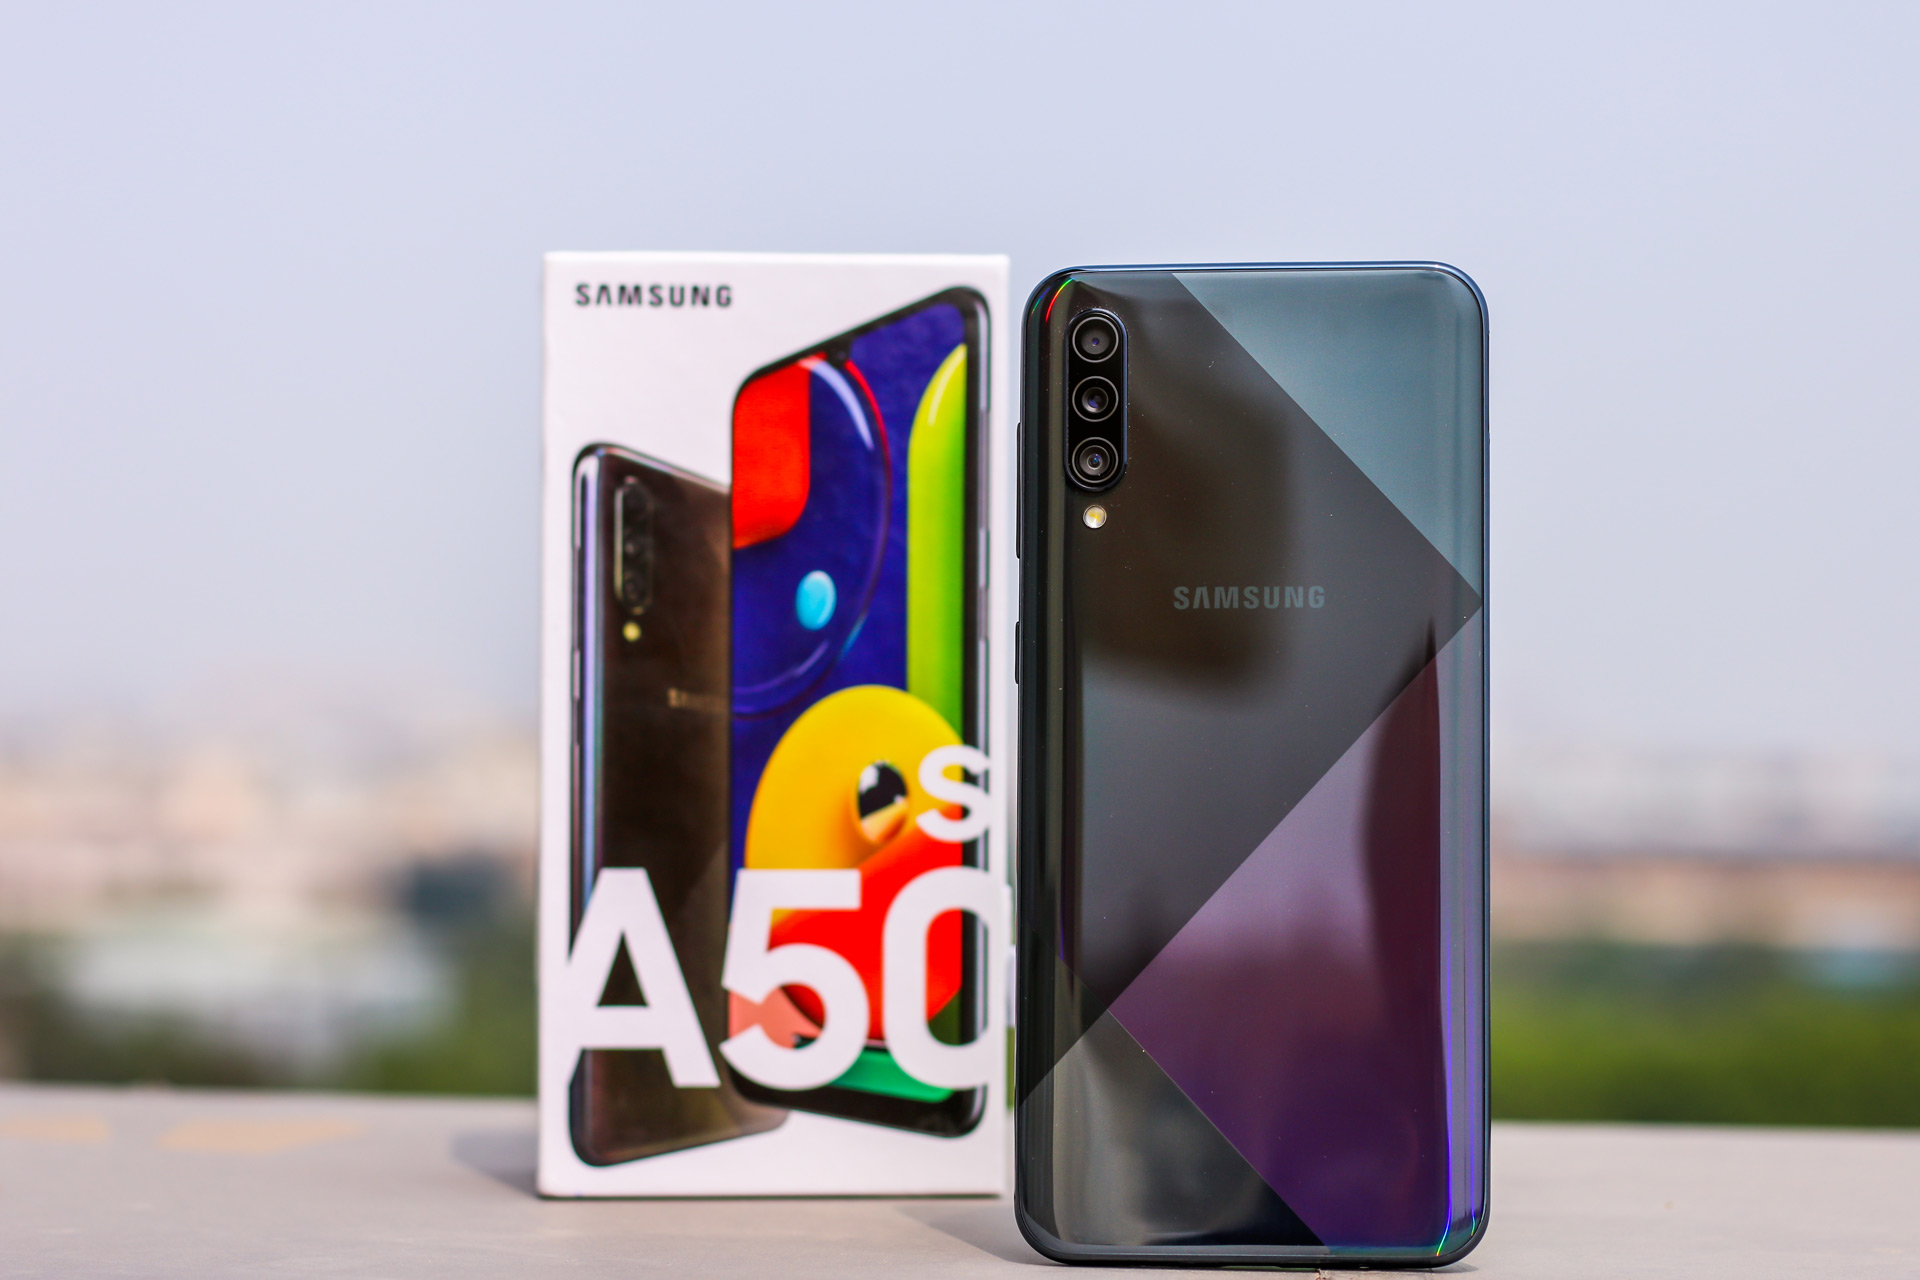 Update Mobile Samsung A50 Price Review